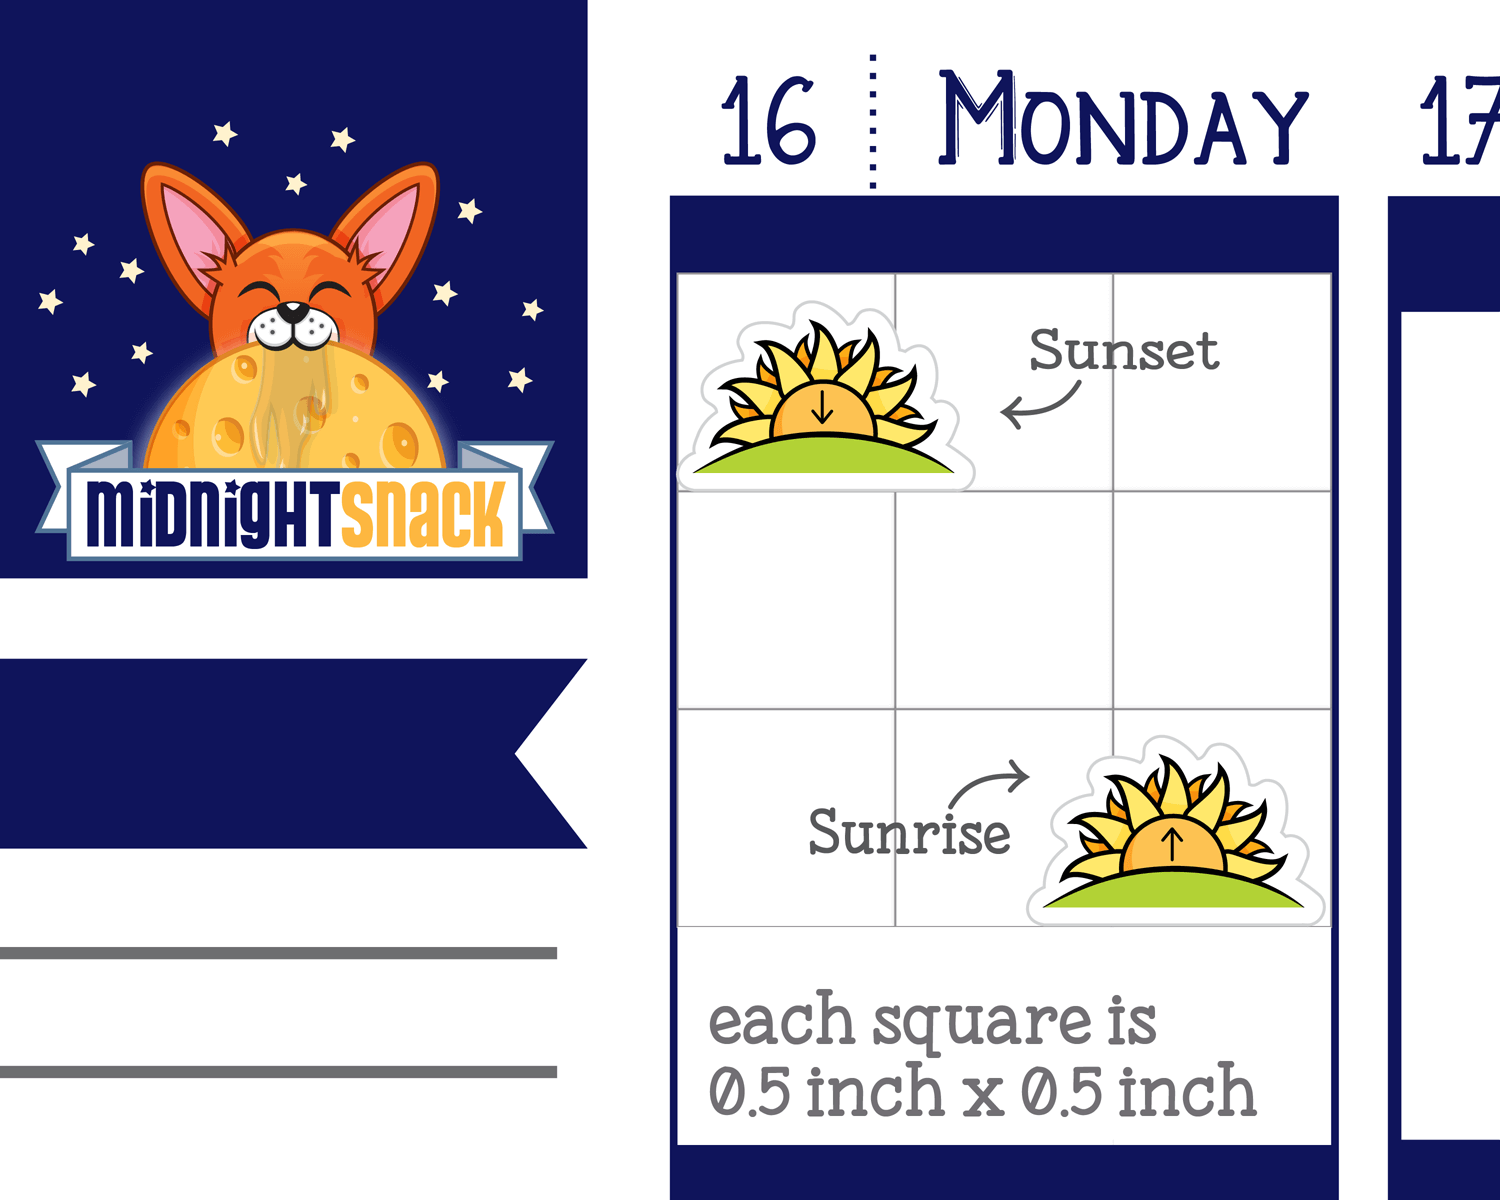 Sunrise or Sunset Icon Stickers: Morning and Evening Planner Stickers